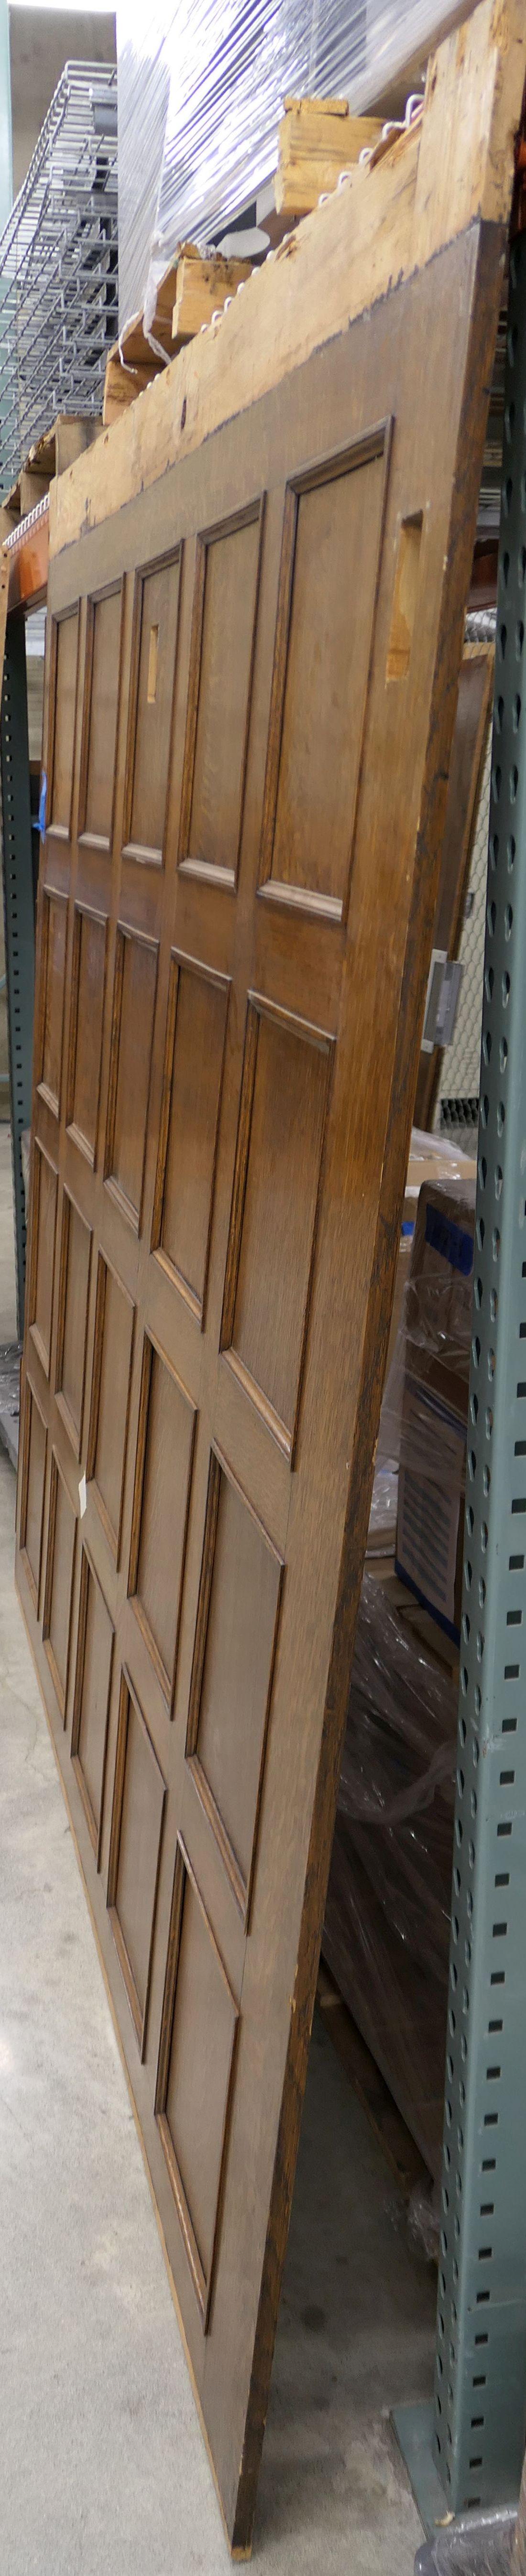 LOT 13: Large Antique Wall Paneling, 1 piece.